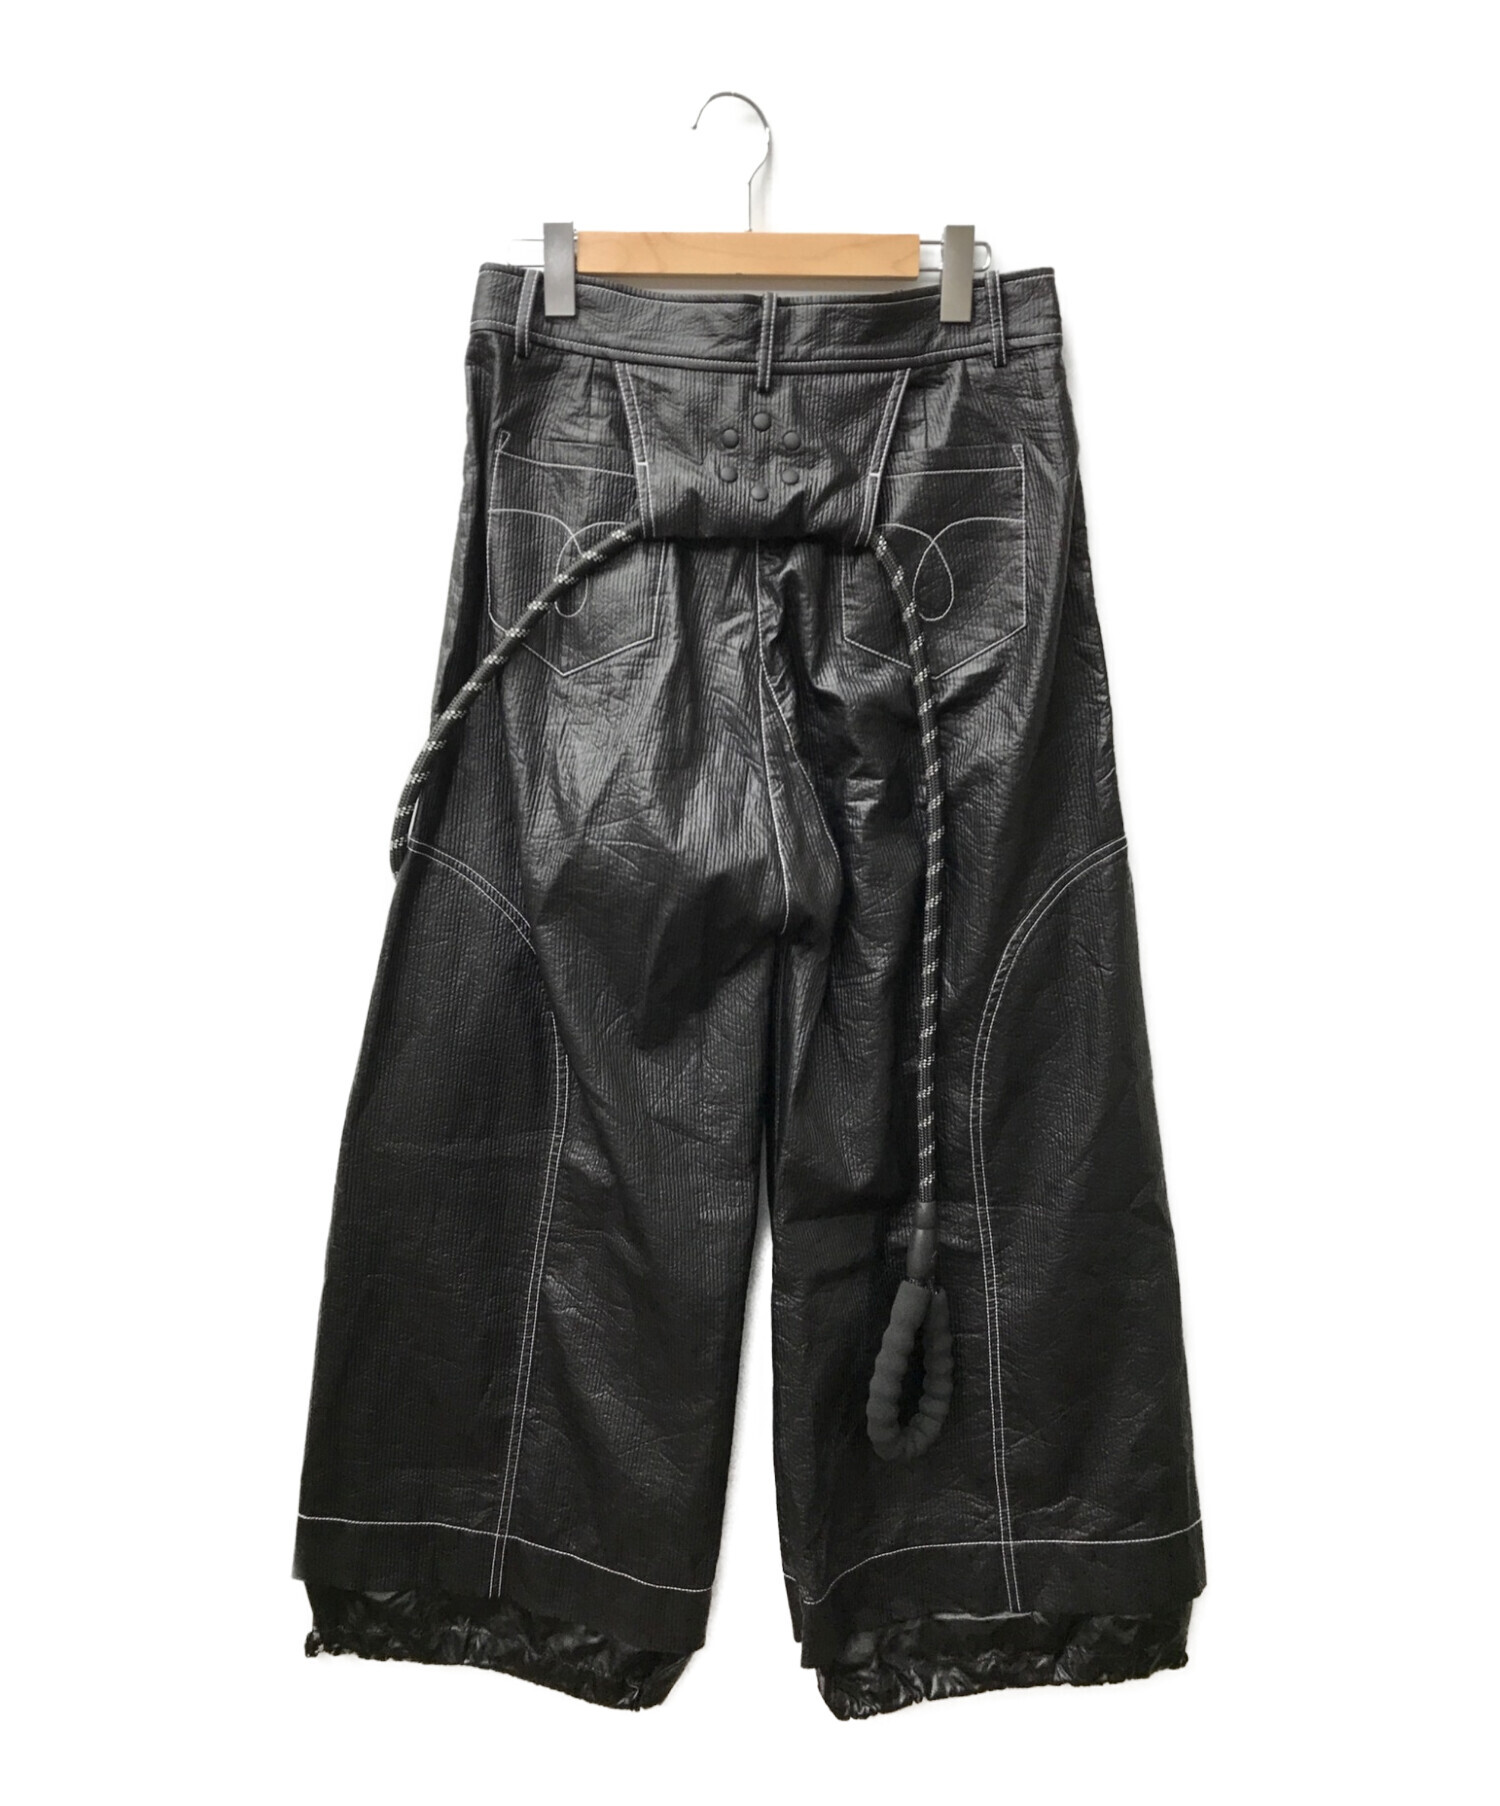 nutemperor WIDE PU LEATHER PANTS (BLACK)値段交渉可能なので